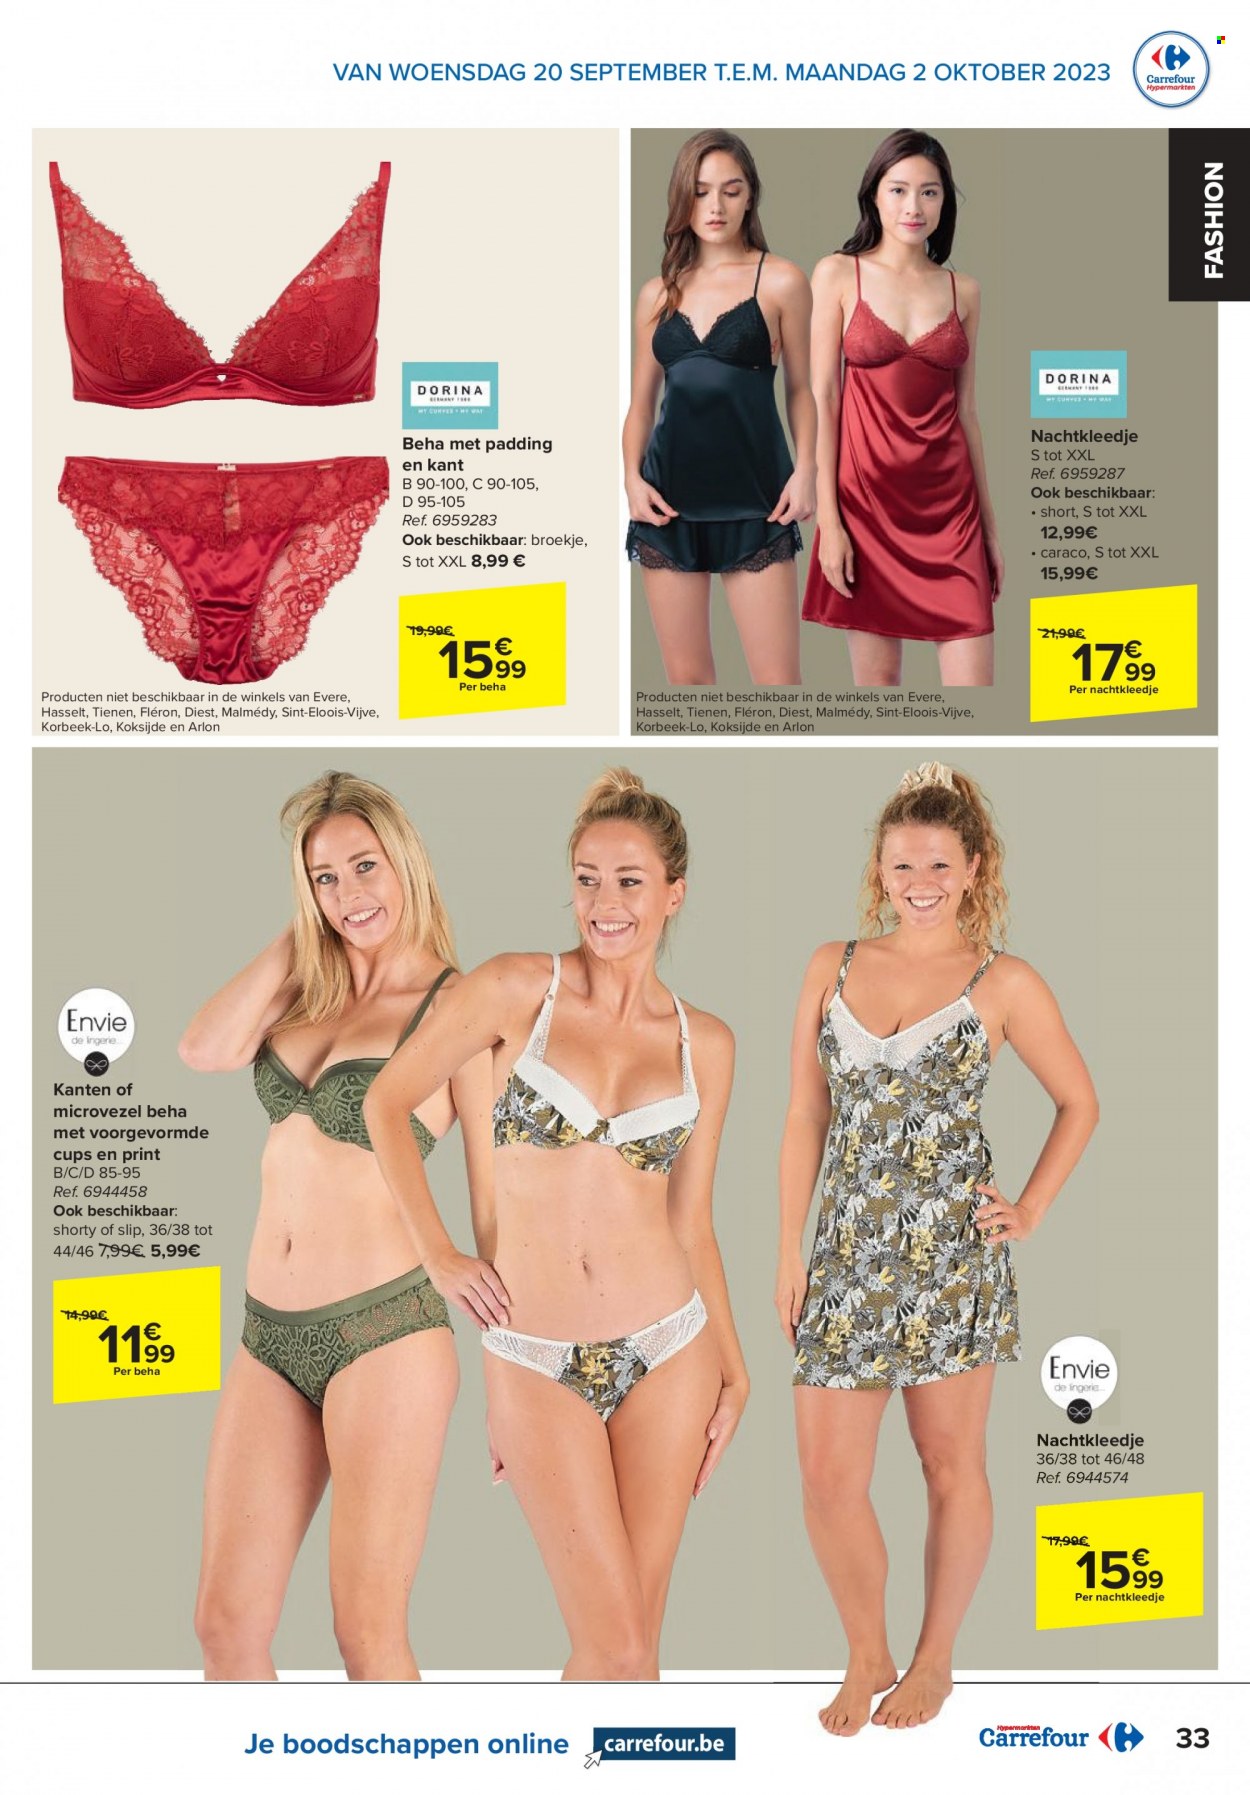 Catalogue Carrefour hypermarkt - 20.9.2023 - 2.10.2023. Page 33.